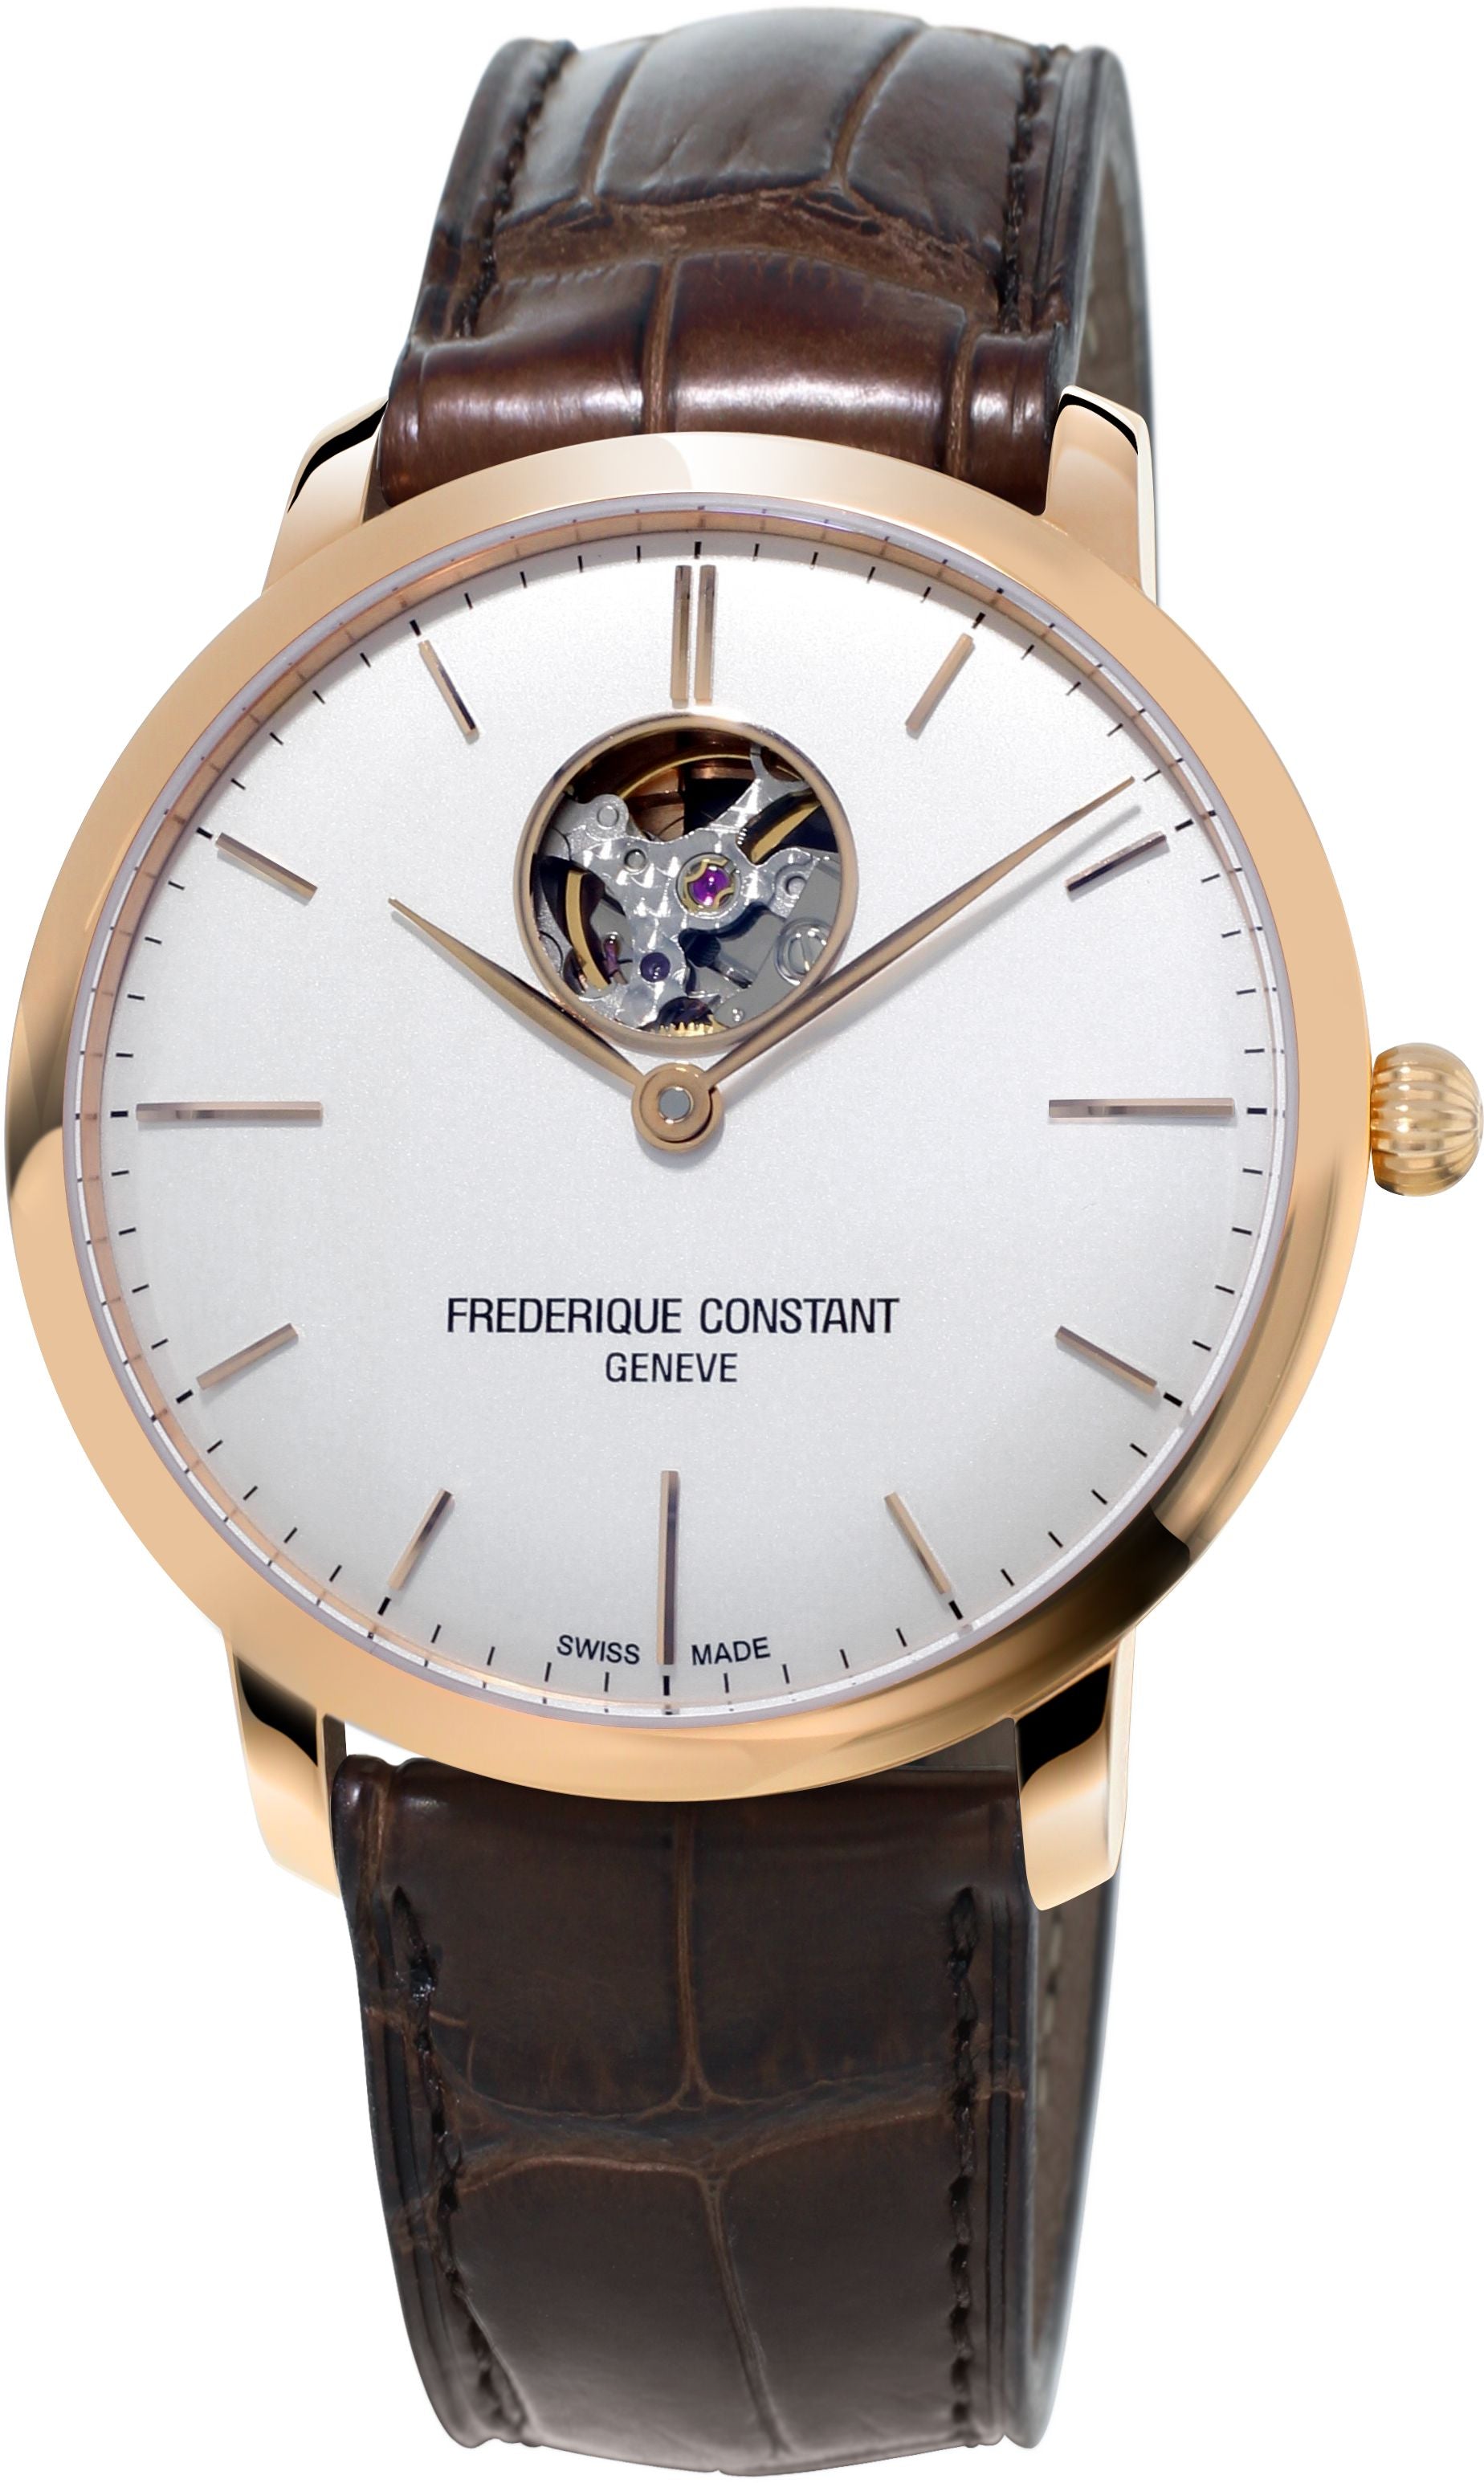 FREDERIQUE CONSTANT MENS STAINLESS STEEL Rose Gold-Tone Automatic SLIMLINE Leather Strap